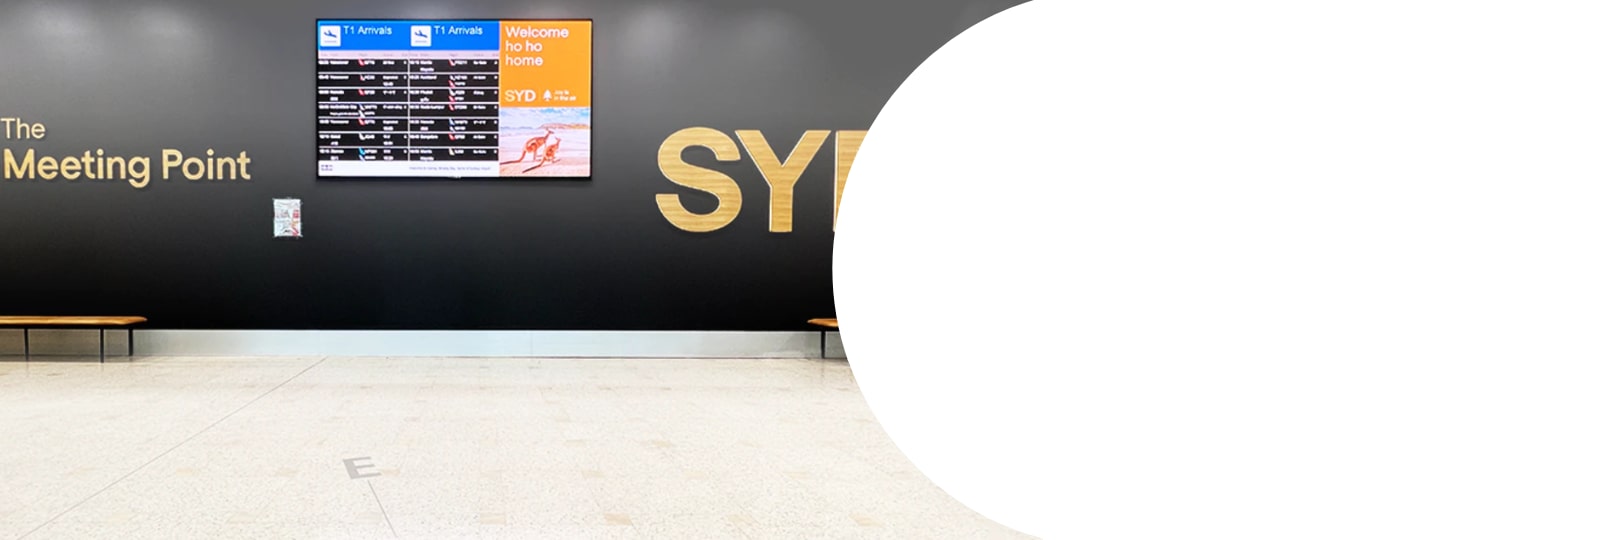 								The Meeting Point Sydney Airport: LG Digital Signage Solutions for Transportation							3